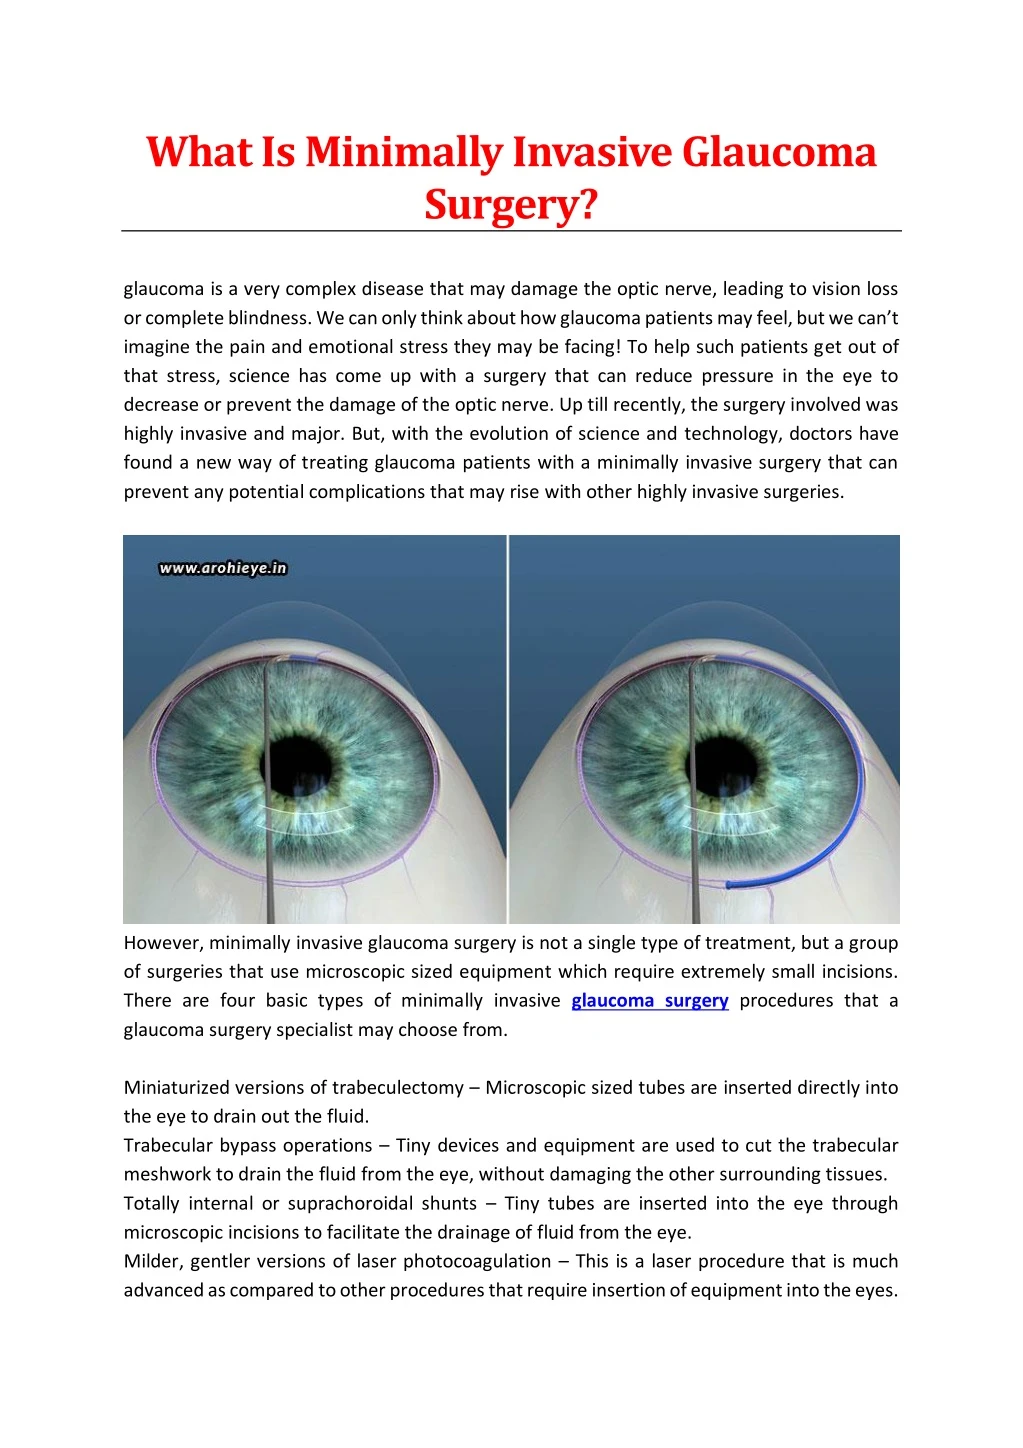 what is minimally invasive glaucoma surgery